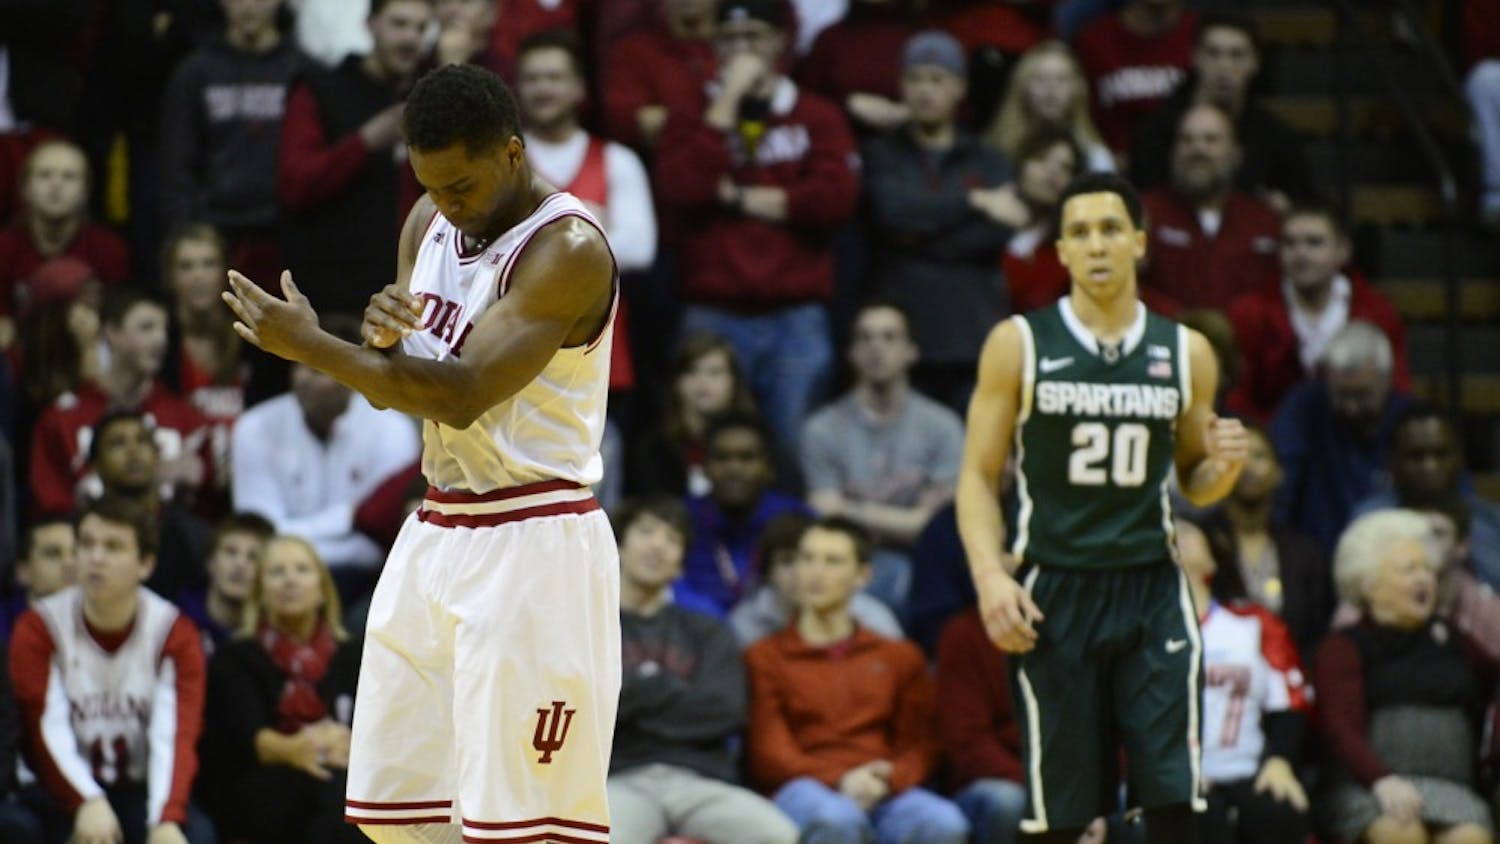 Junior guard Kevin "Yogi" Ferrell reacts after missing a three-pointer during the final minute of IU's game against Michigan State on Saturday at Assembly Hall. Ferrell scored 21 points in the 74-72 loss to the Spartans.